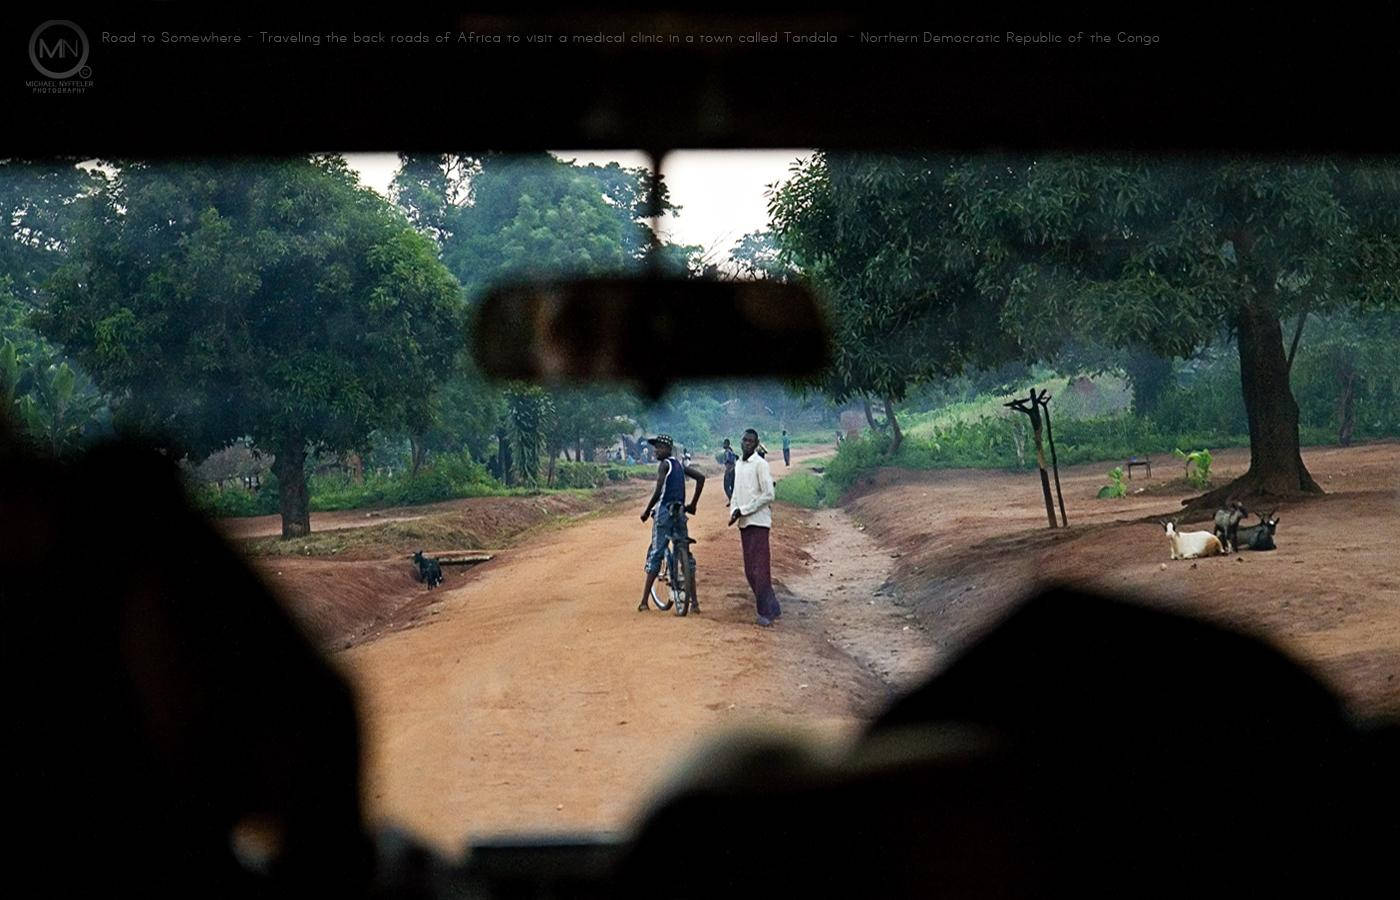 Roads And Trees In Congo Wallpaper